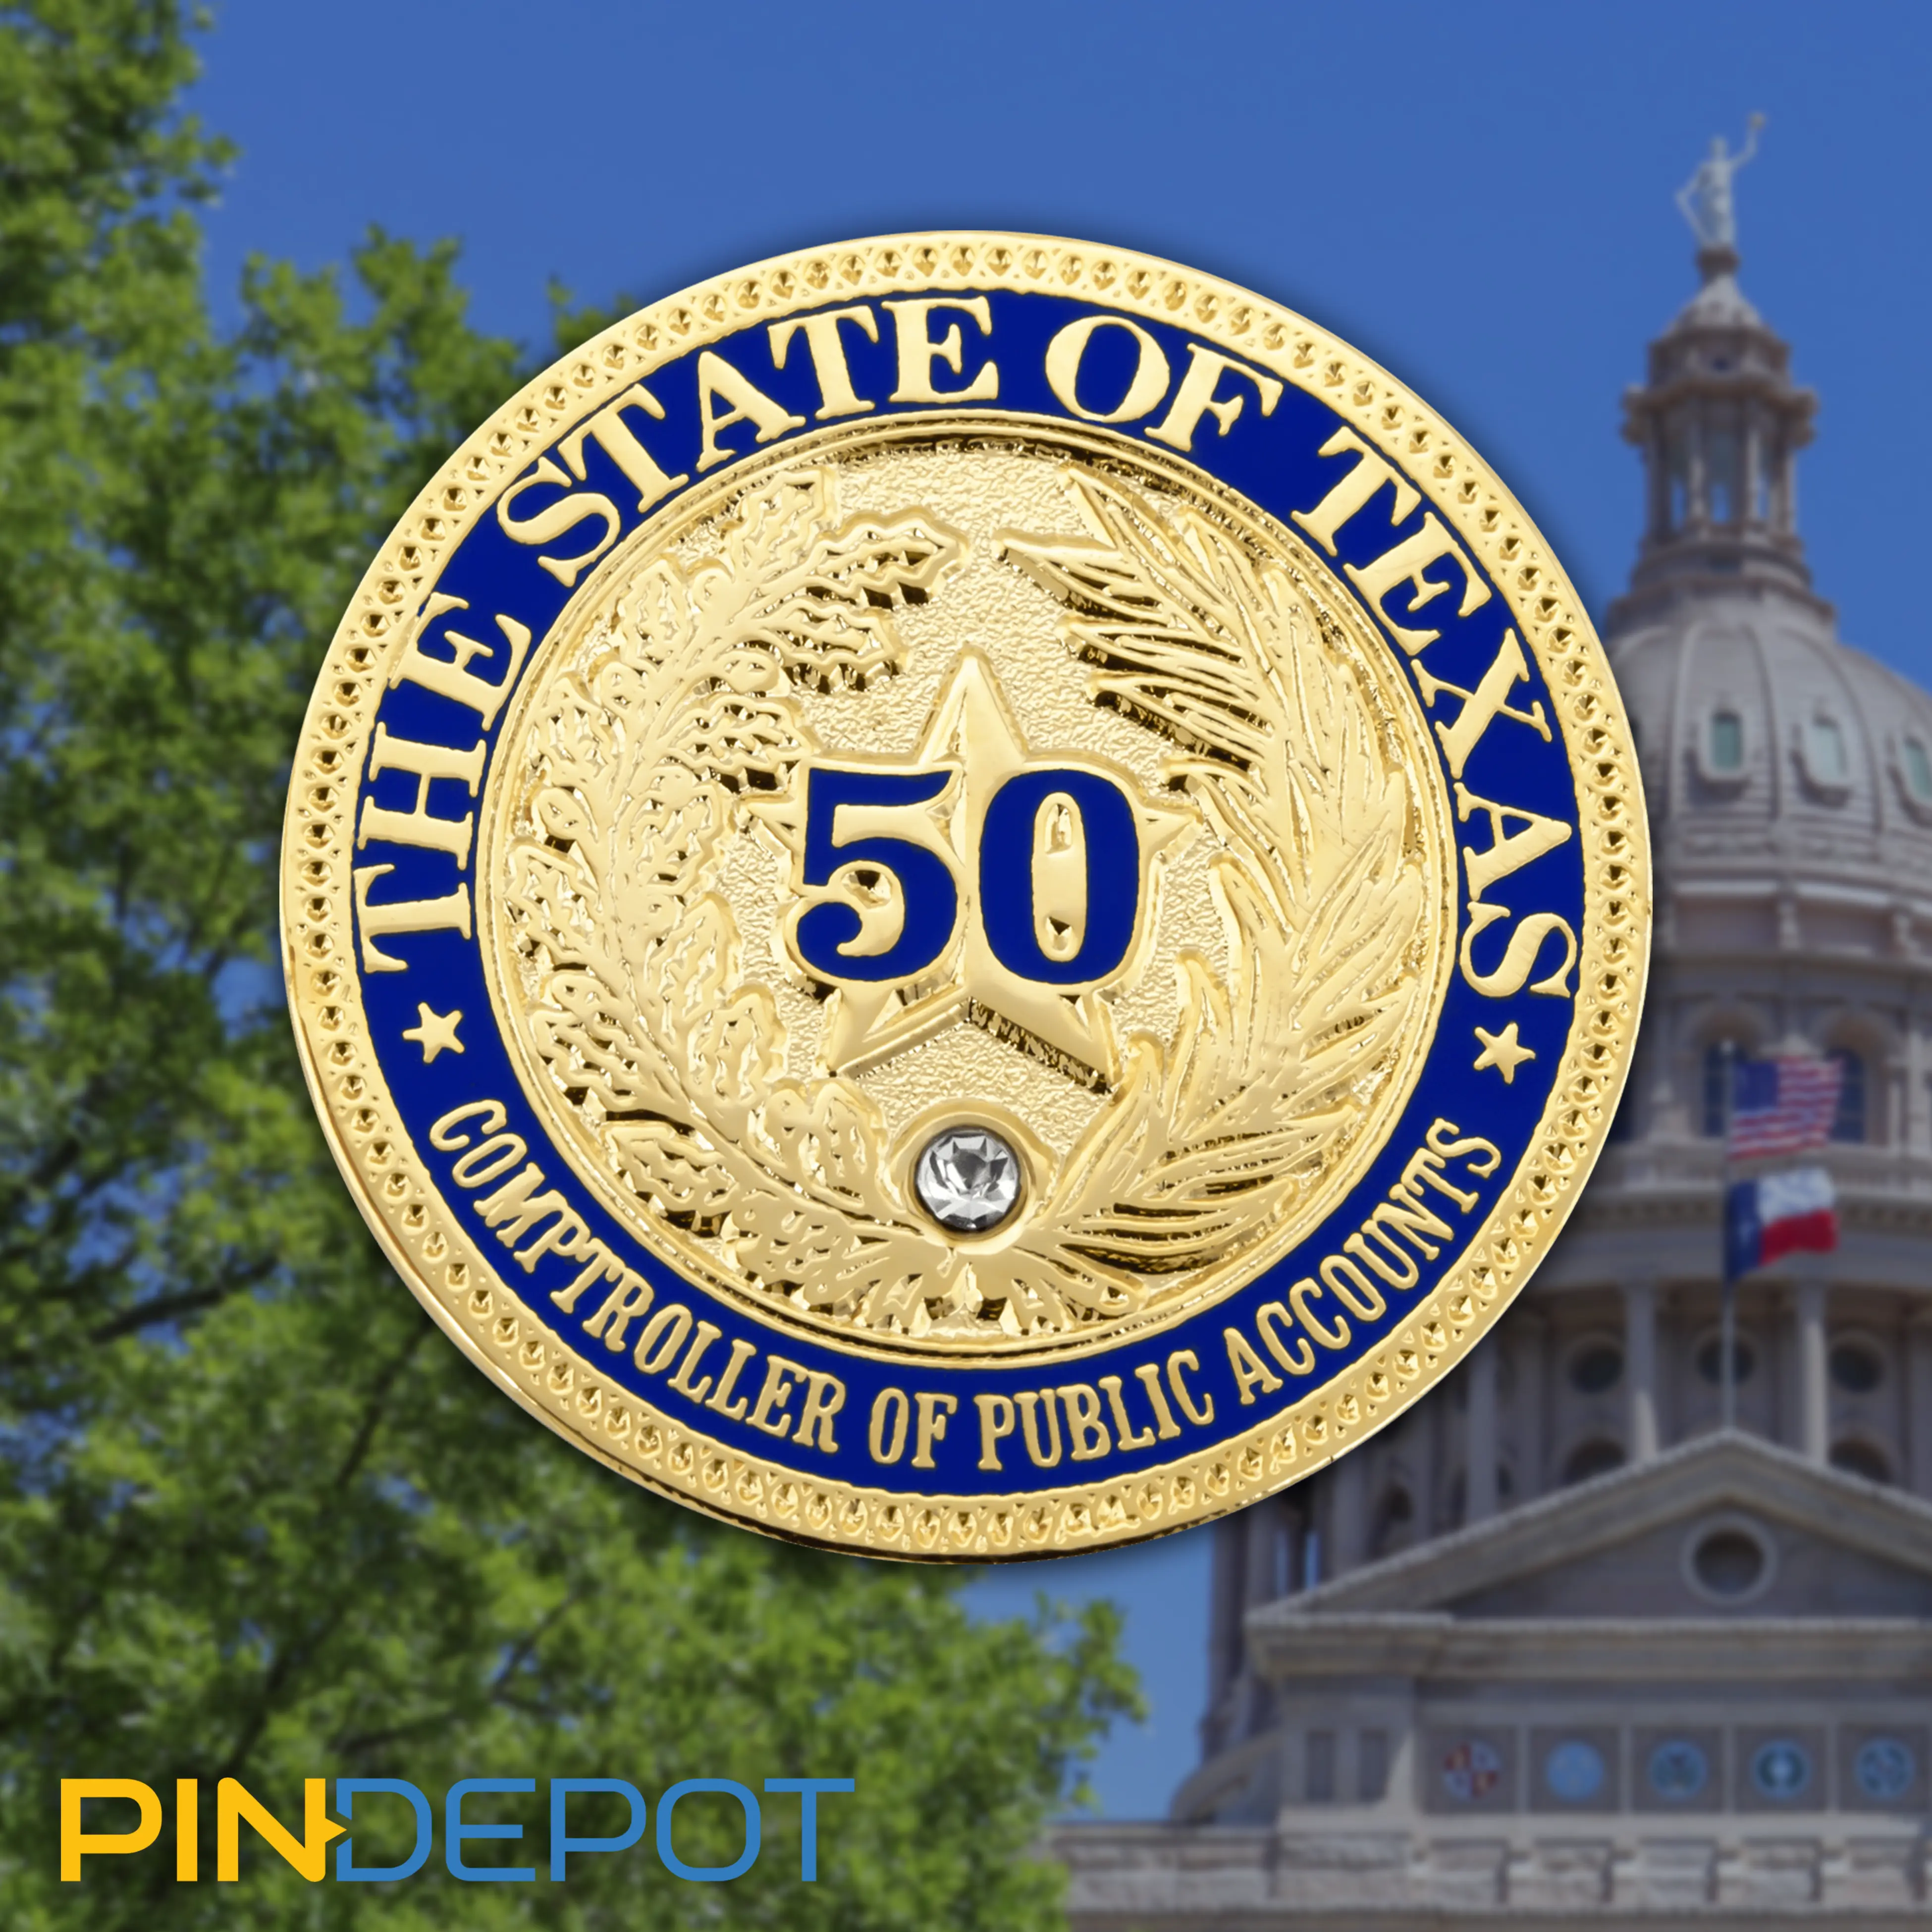 Texas Comptroller - 50 Years